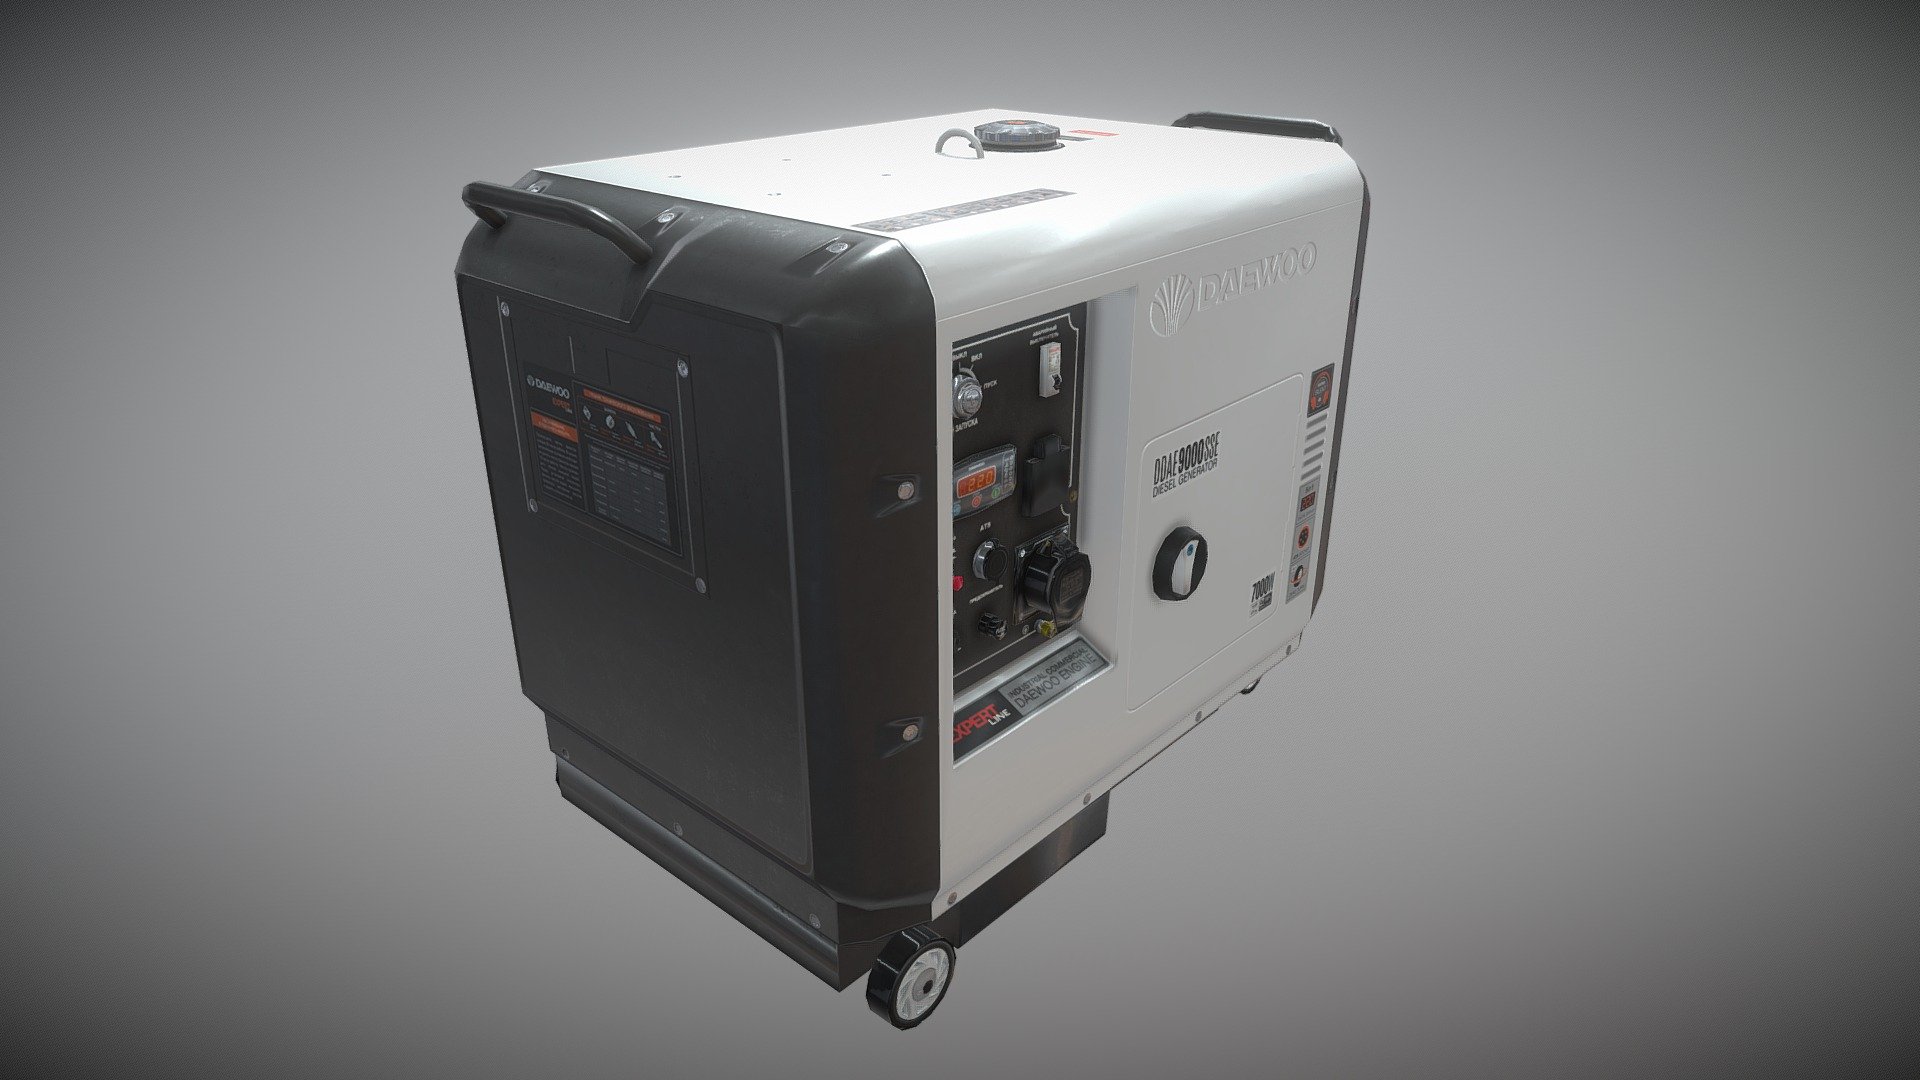 Daewoo DDAE9000SSE diesel generator 7000W. Made in 3ds Max, Substance Painter, Photoshop. 4k PBR textures, 2.9 tris, low poly 3d model